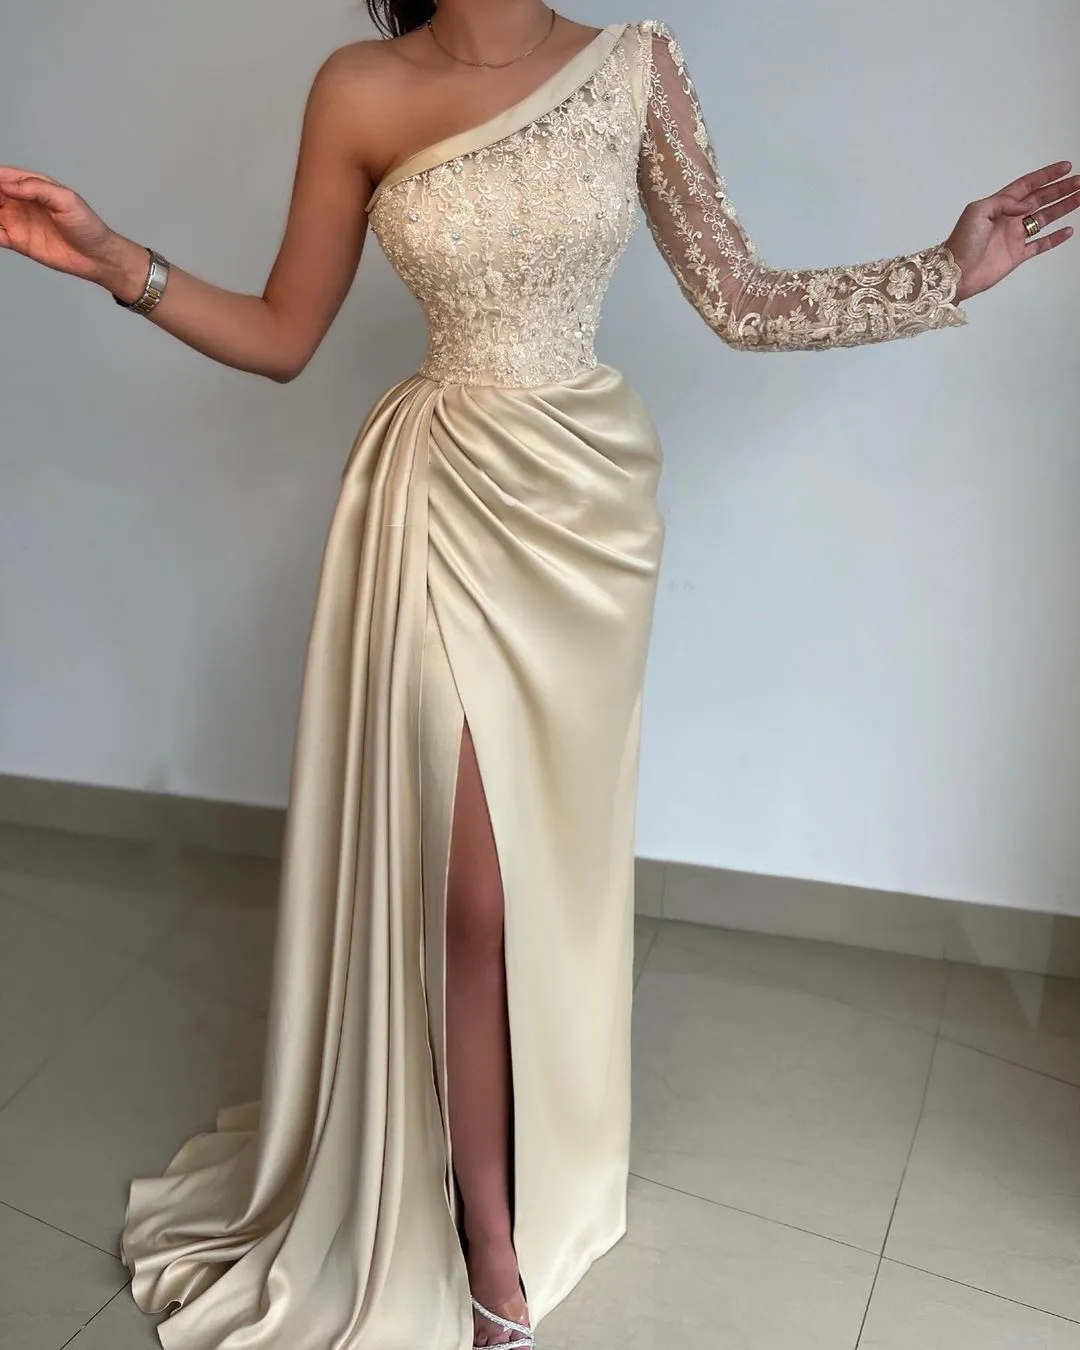 Gorgeous Prom Empire Mermaid Dresses Matte Satin Strap Ruche One-shoulder Train Dress One sleeve Custom Made Formal Evening Dress Sweep Plus Size